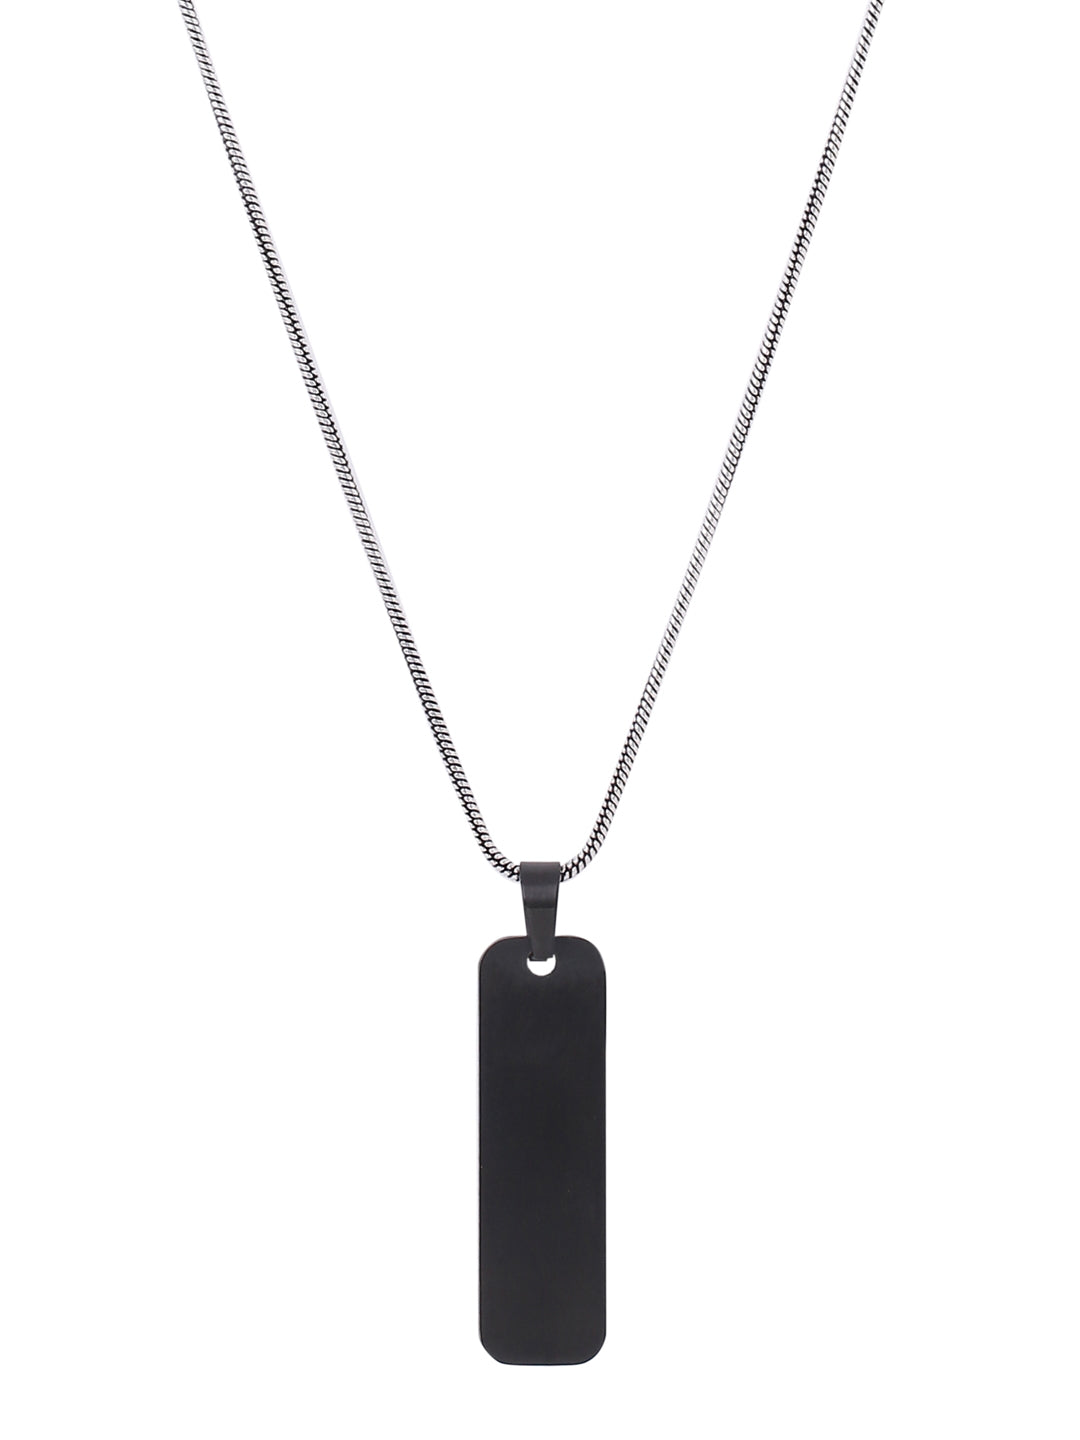 stainless-steel-bar-pendant-necklace-for-mens-viraasi